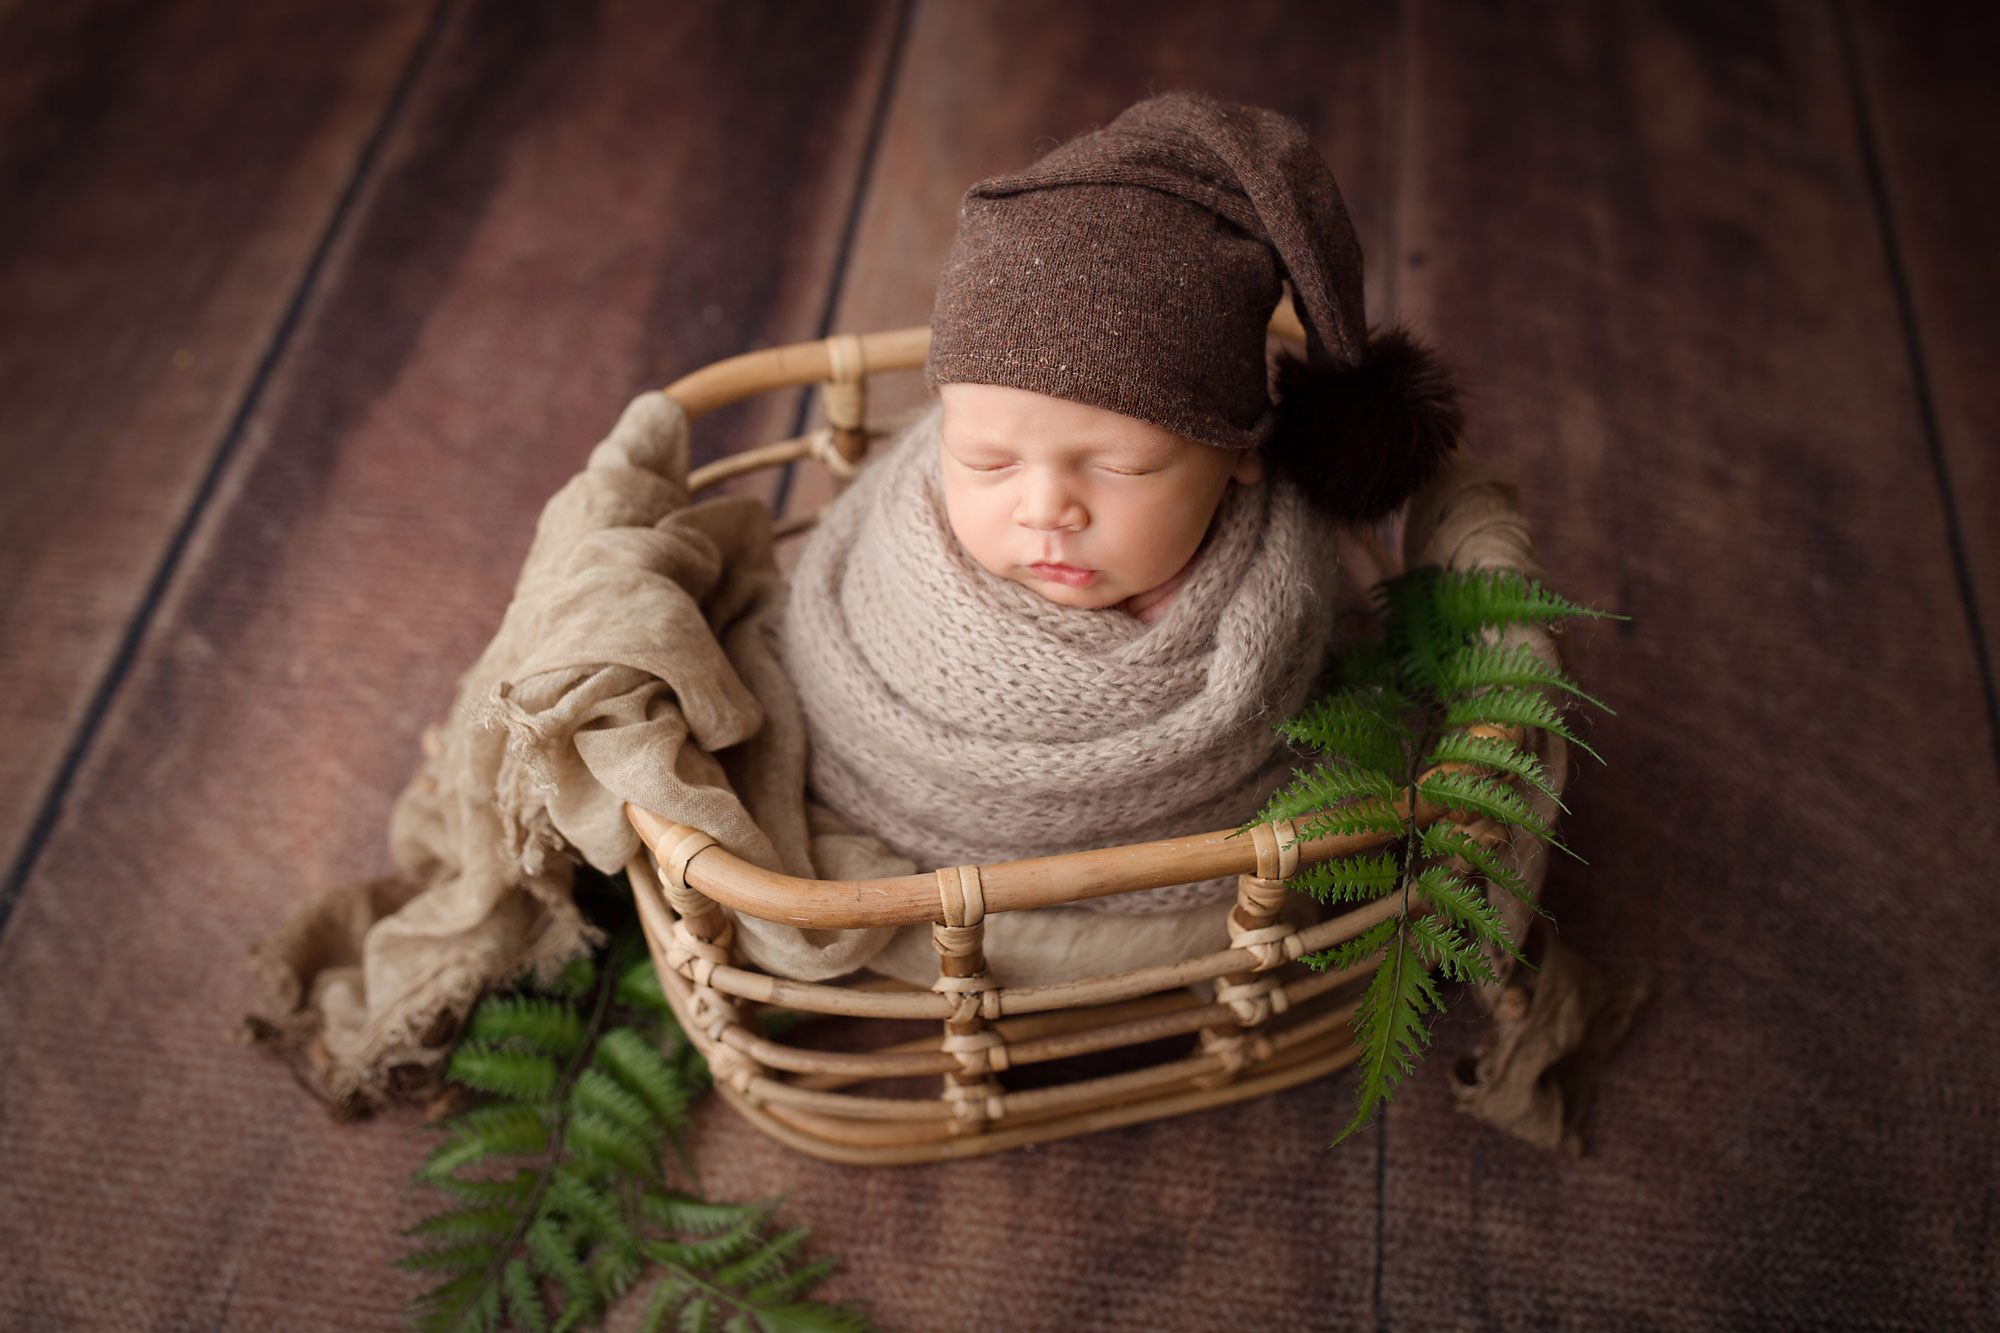 newborn photography near me pittstown, baby swaddled in gray with brown hat sleeping in wicker basket